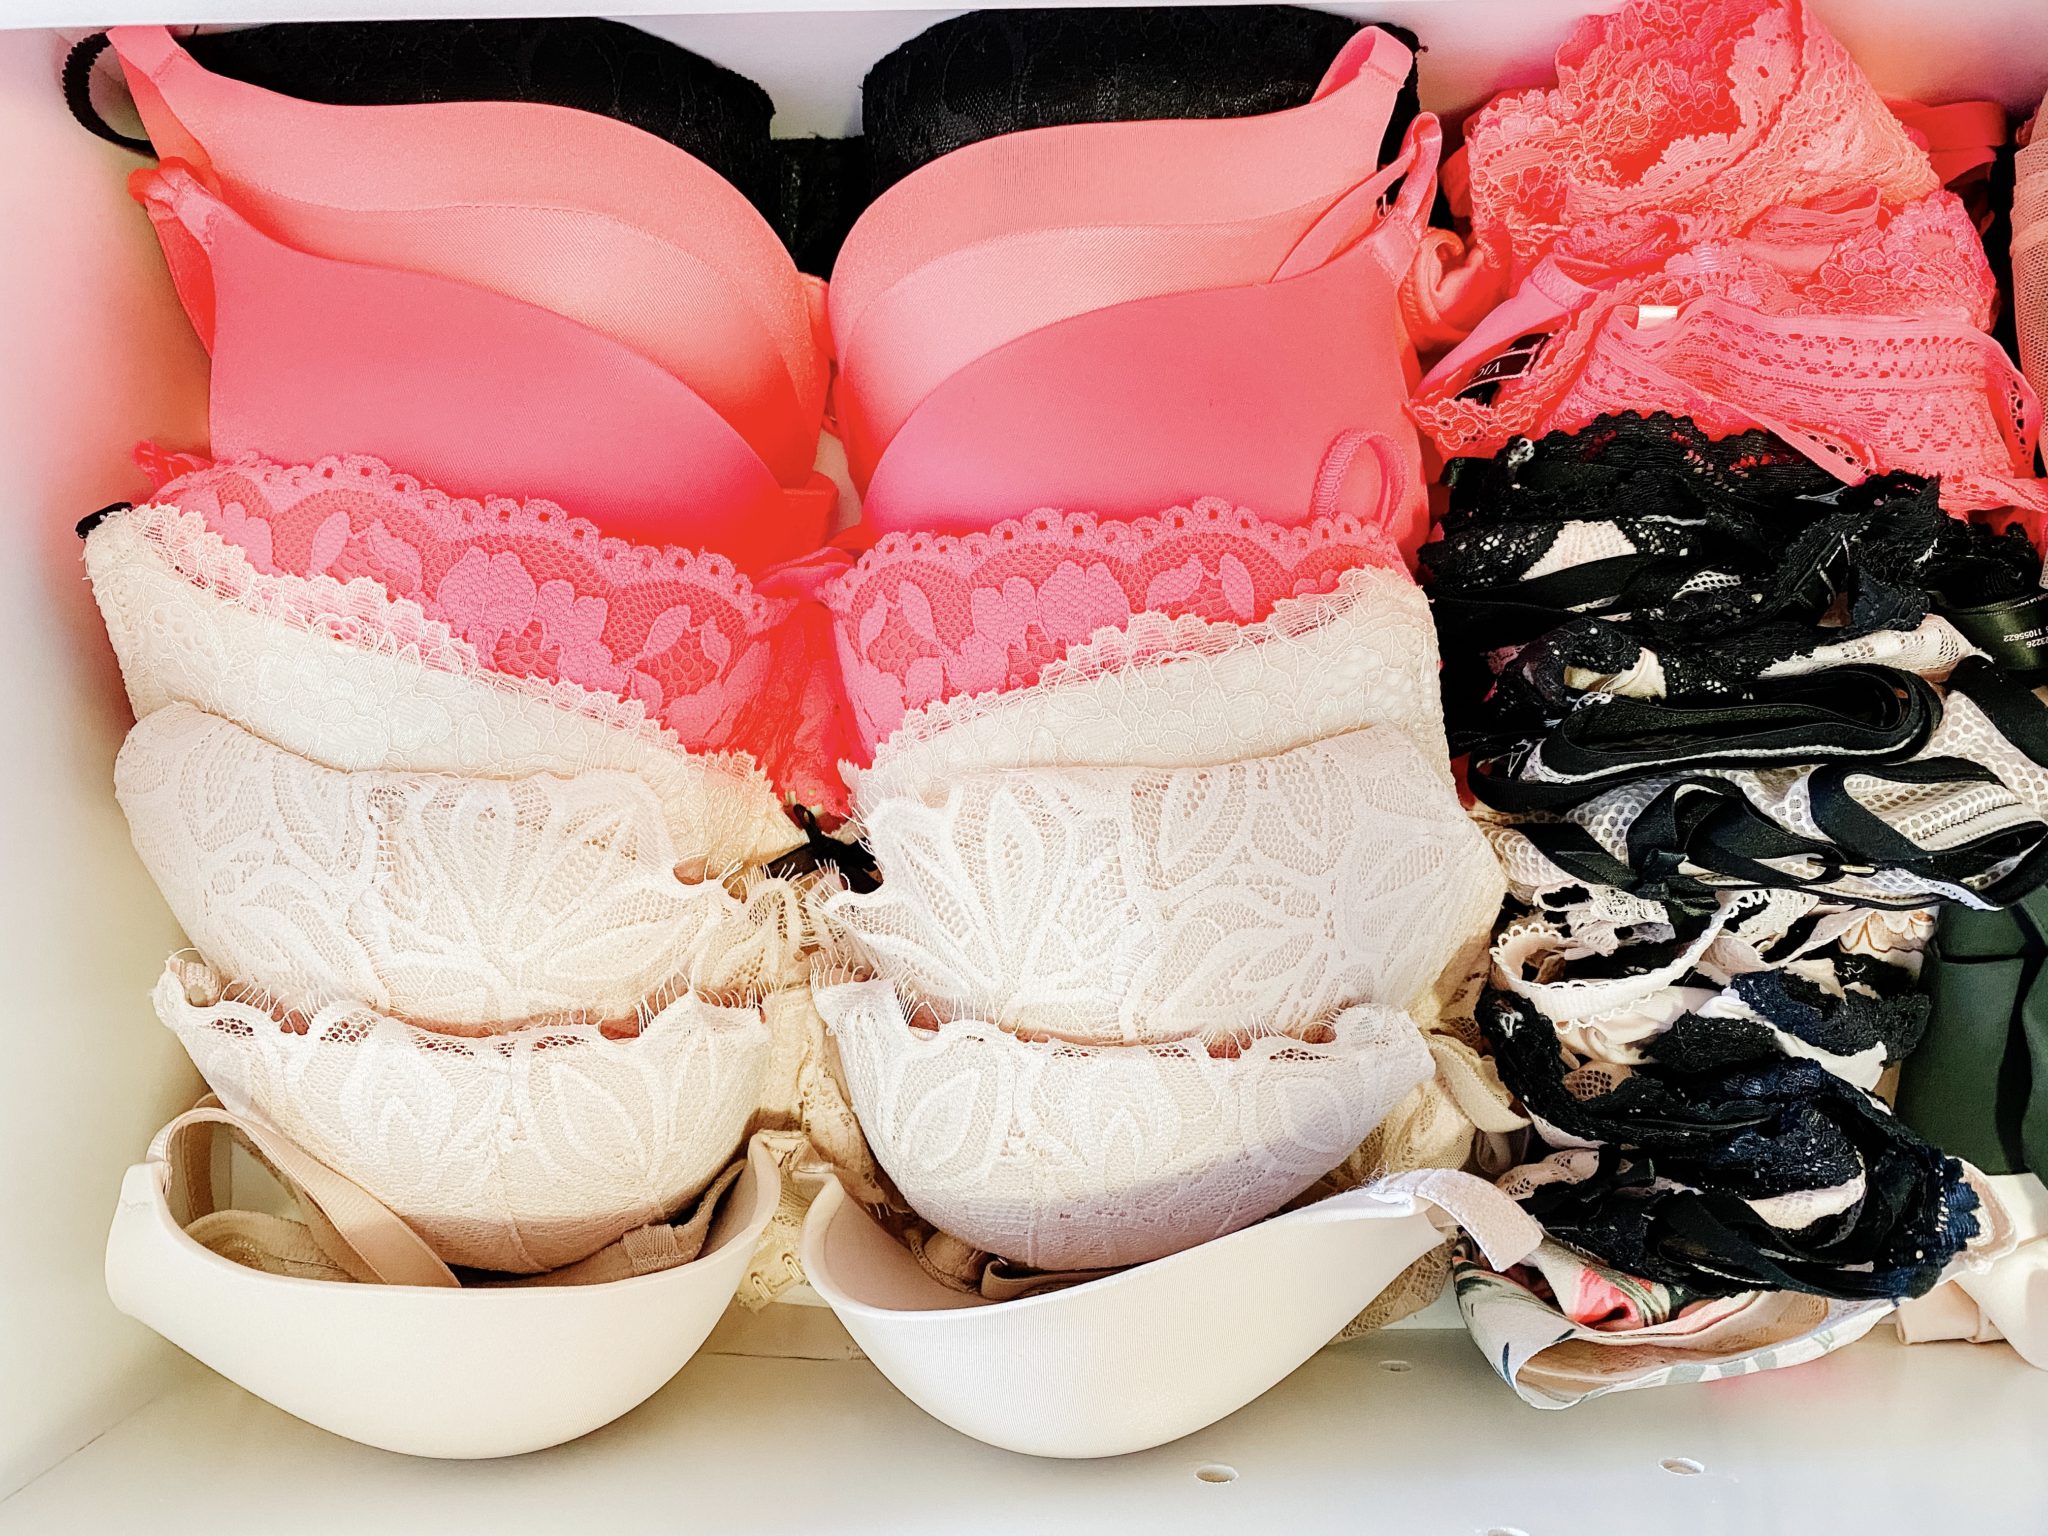 Curating A Beautiful Lingerie Drawer